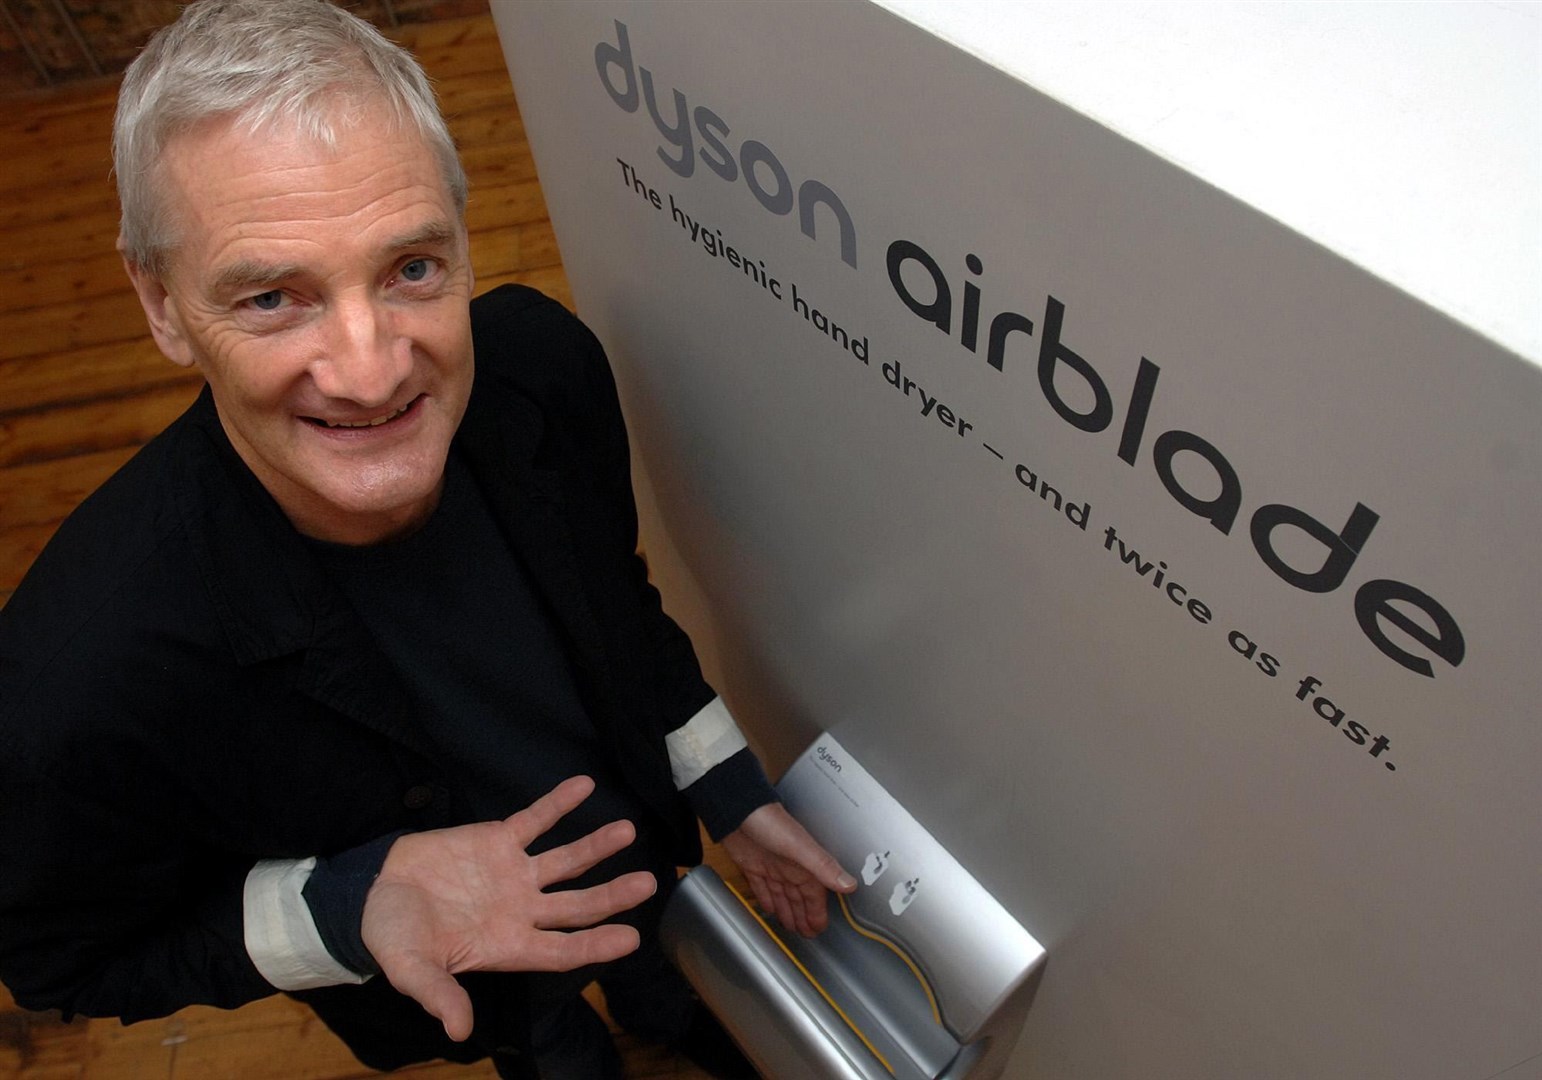 Sir James Dyson still employees 3,500 people in Britain despite moving the company’s headquarters to Singapore (Matthew Fearn/PA)